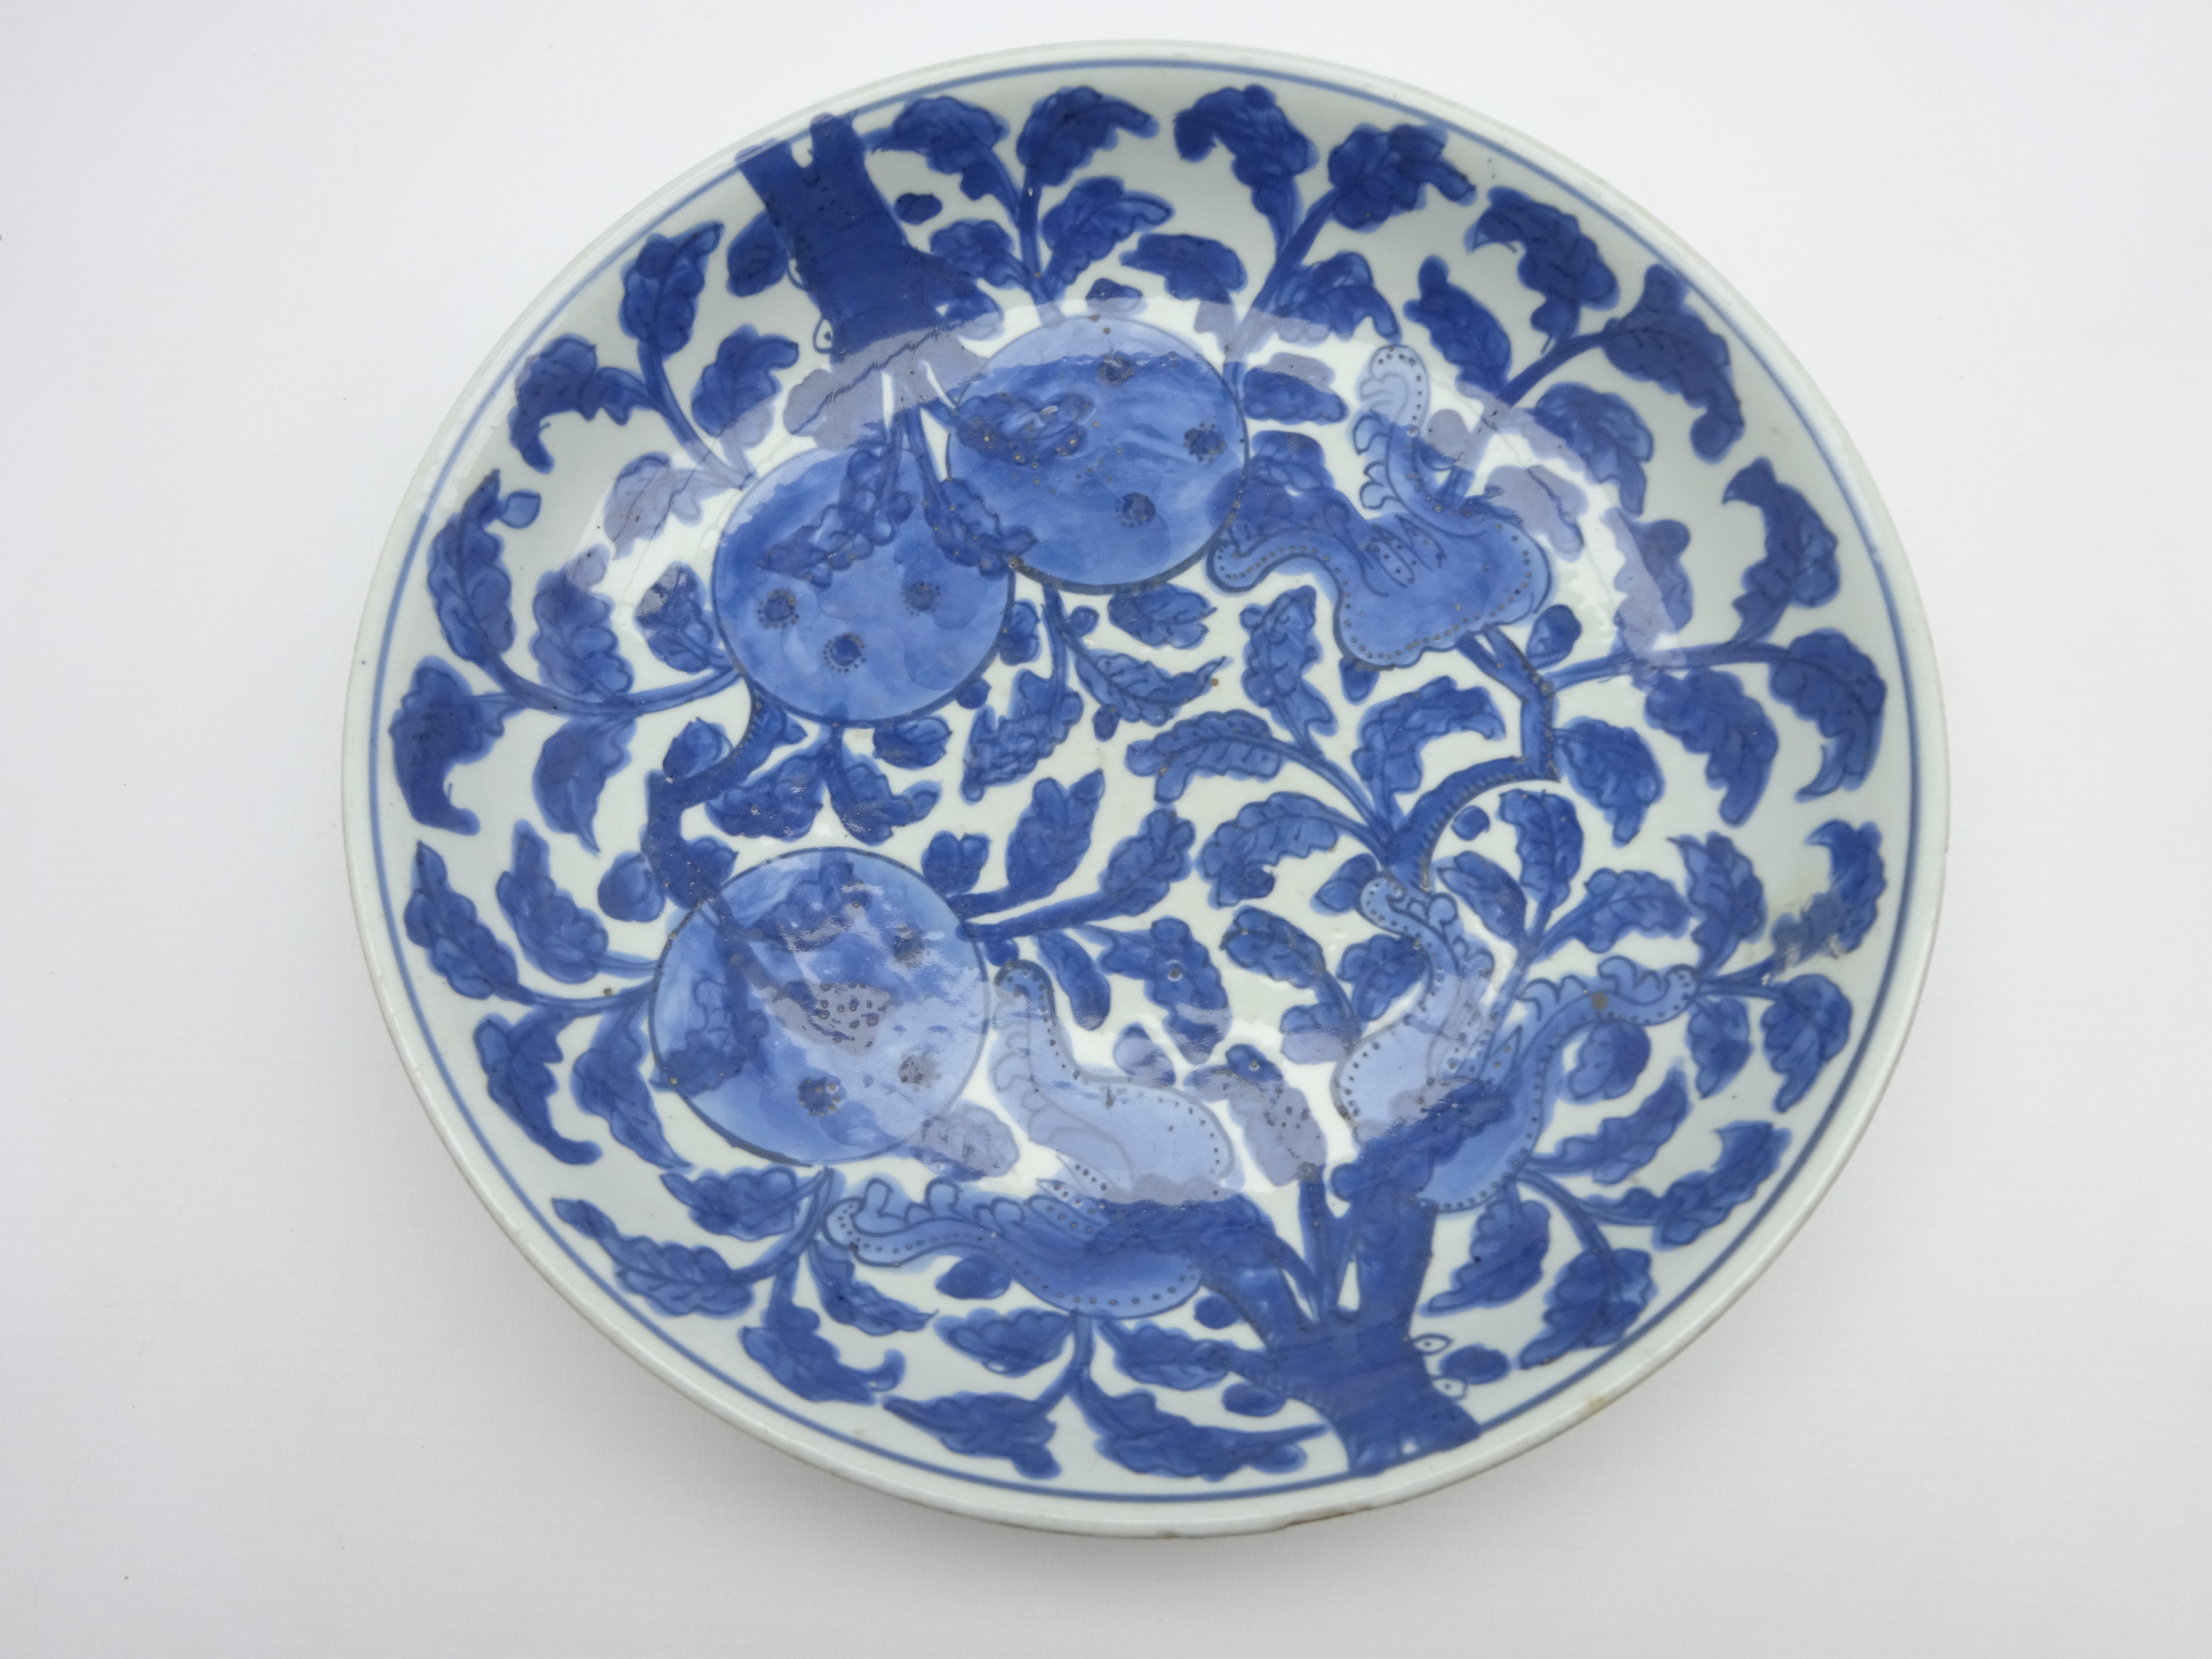 Chinese Kang Hsi shallow bowl decorated with fruit and flowers in blue and white 26cms Diam - Image 2 of 4